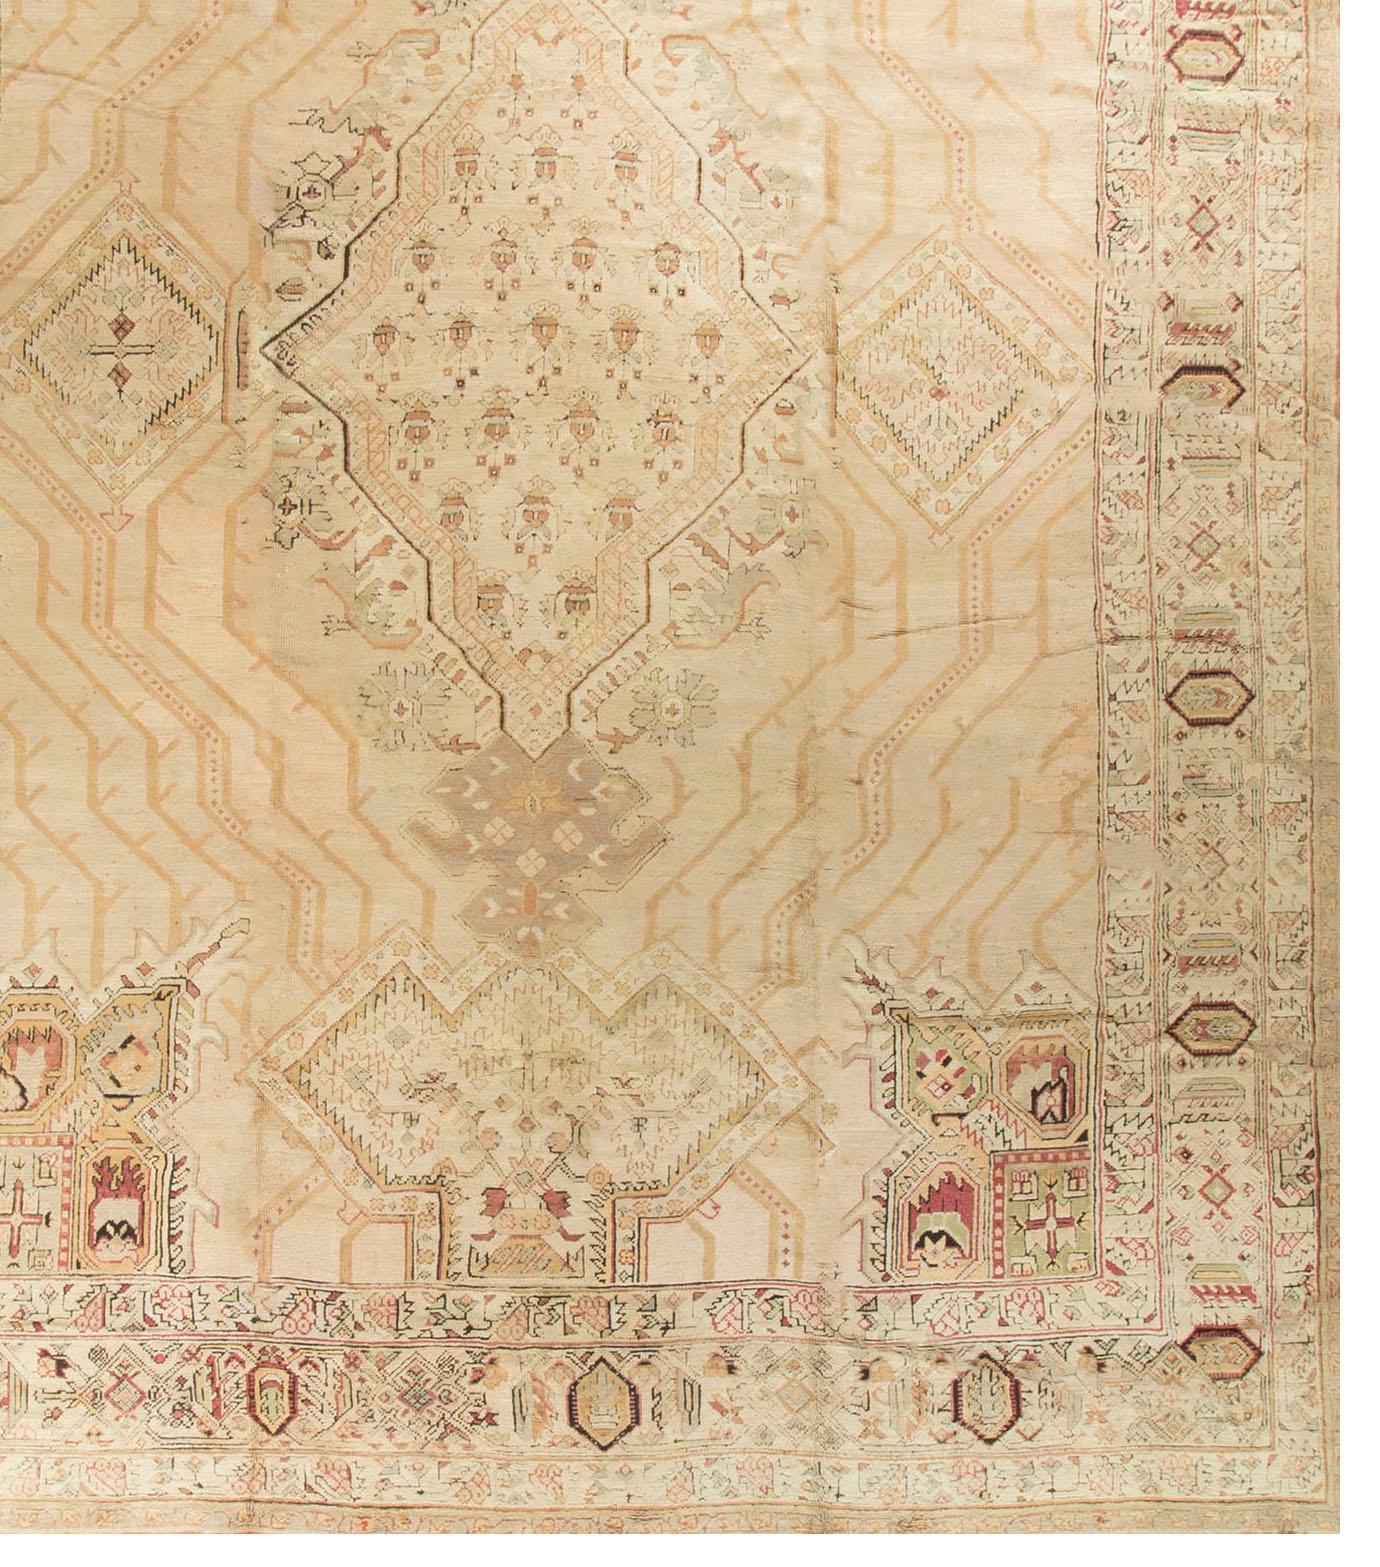 The soft colors in this oversize antique Oushak rug create a harmony with the design that lends itself to a wide variety of different room settings. Peaceful and tranquil are the words that come to mind.